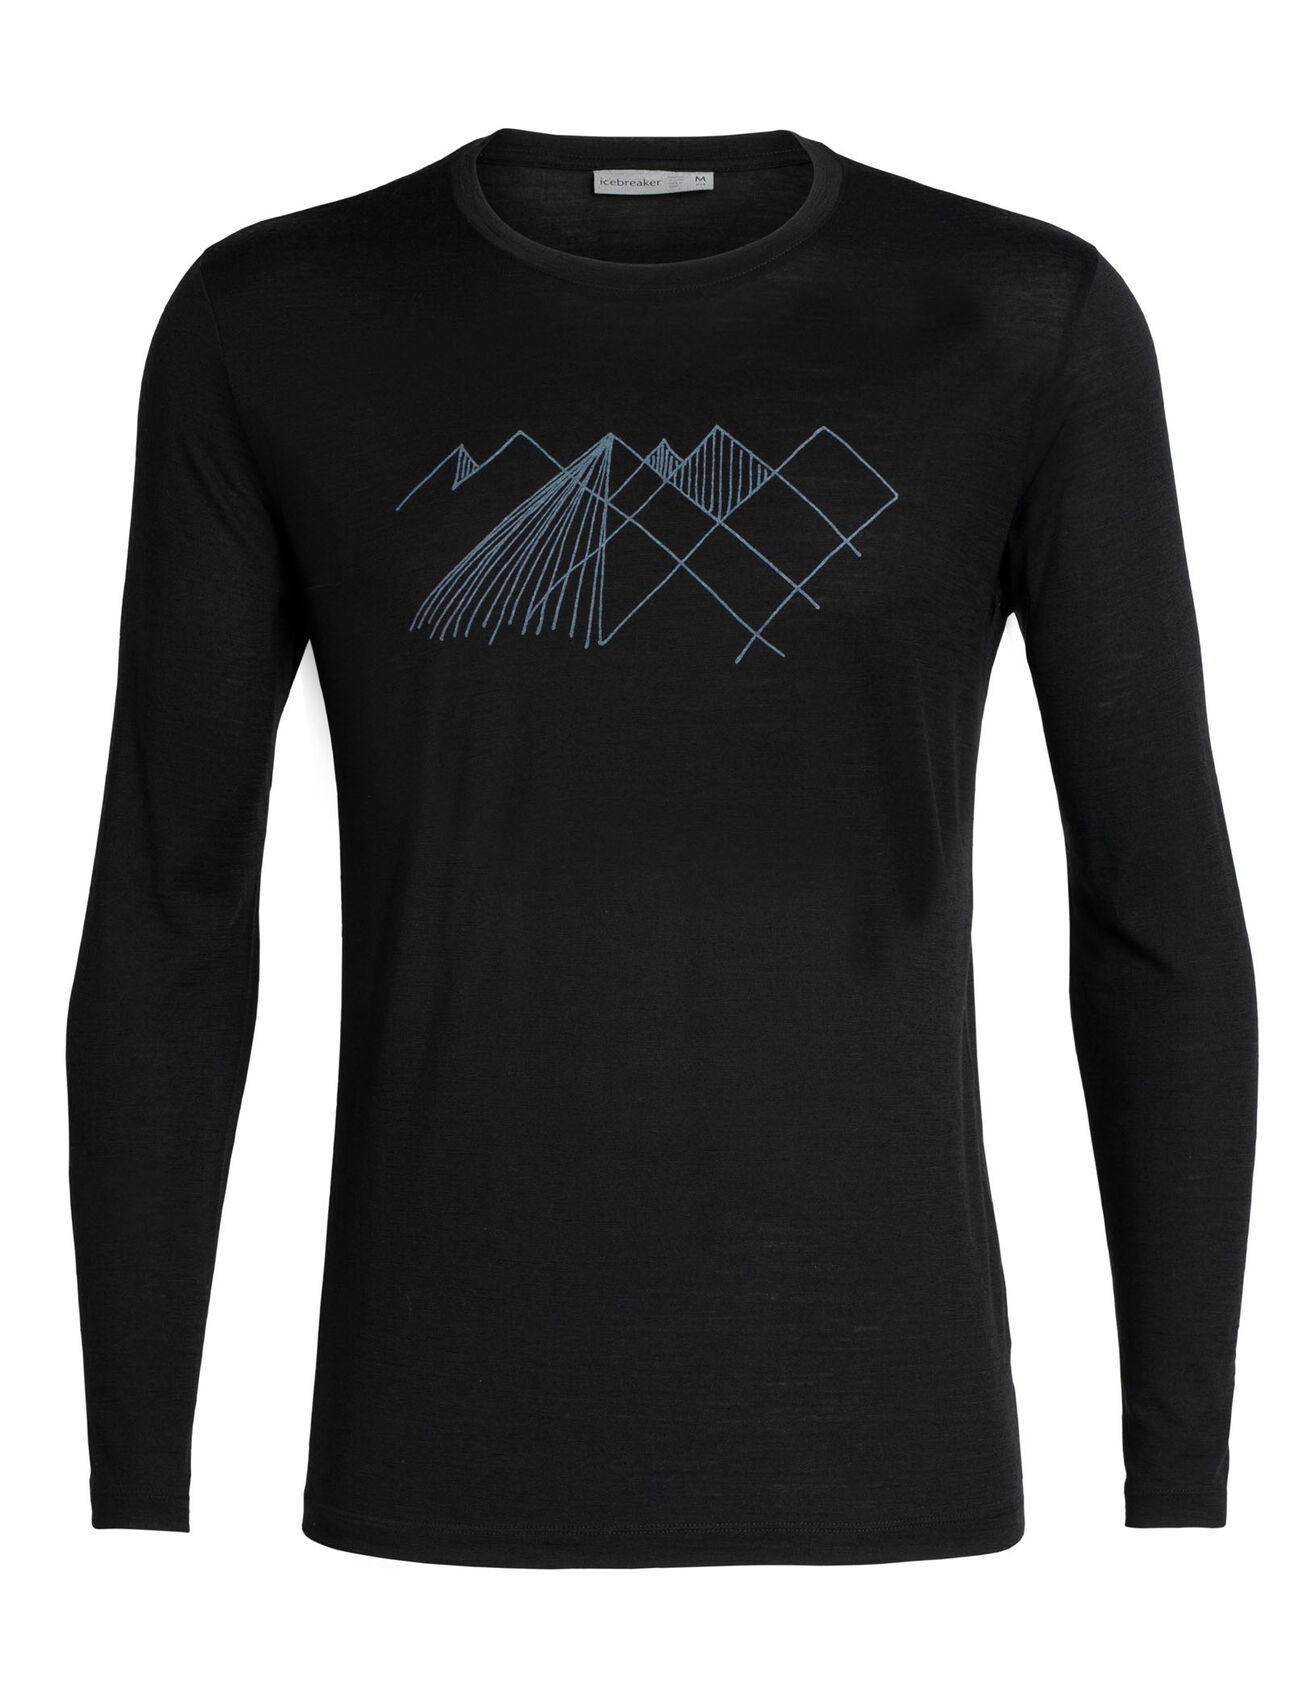 Mens Merino Tech Lite Long Sleeve Crewe T-Shirt Geo Mountain Our most versatile tech tee, in breathable, odour-resistant merino wool. Artist William Carden-Horton creates a simple abstract view of Mt Cook National Park in New Zealand’s Southern Alps.